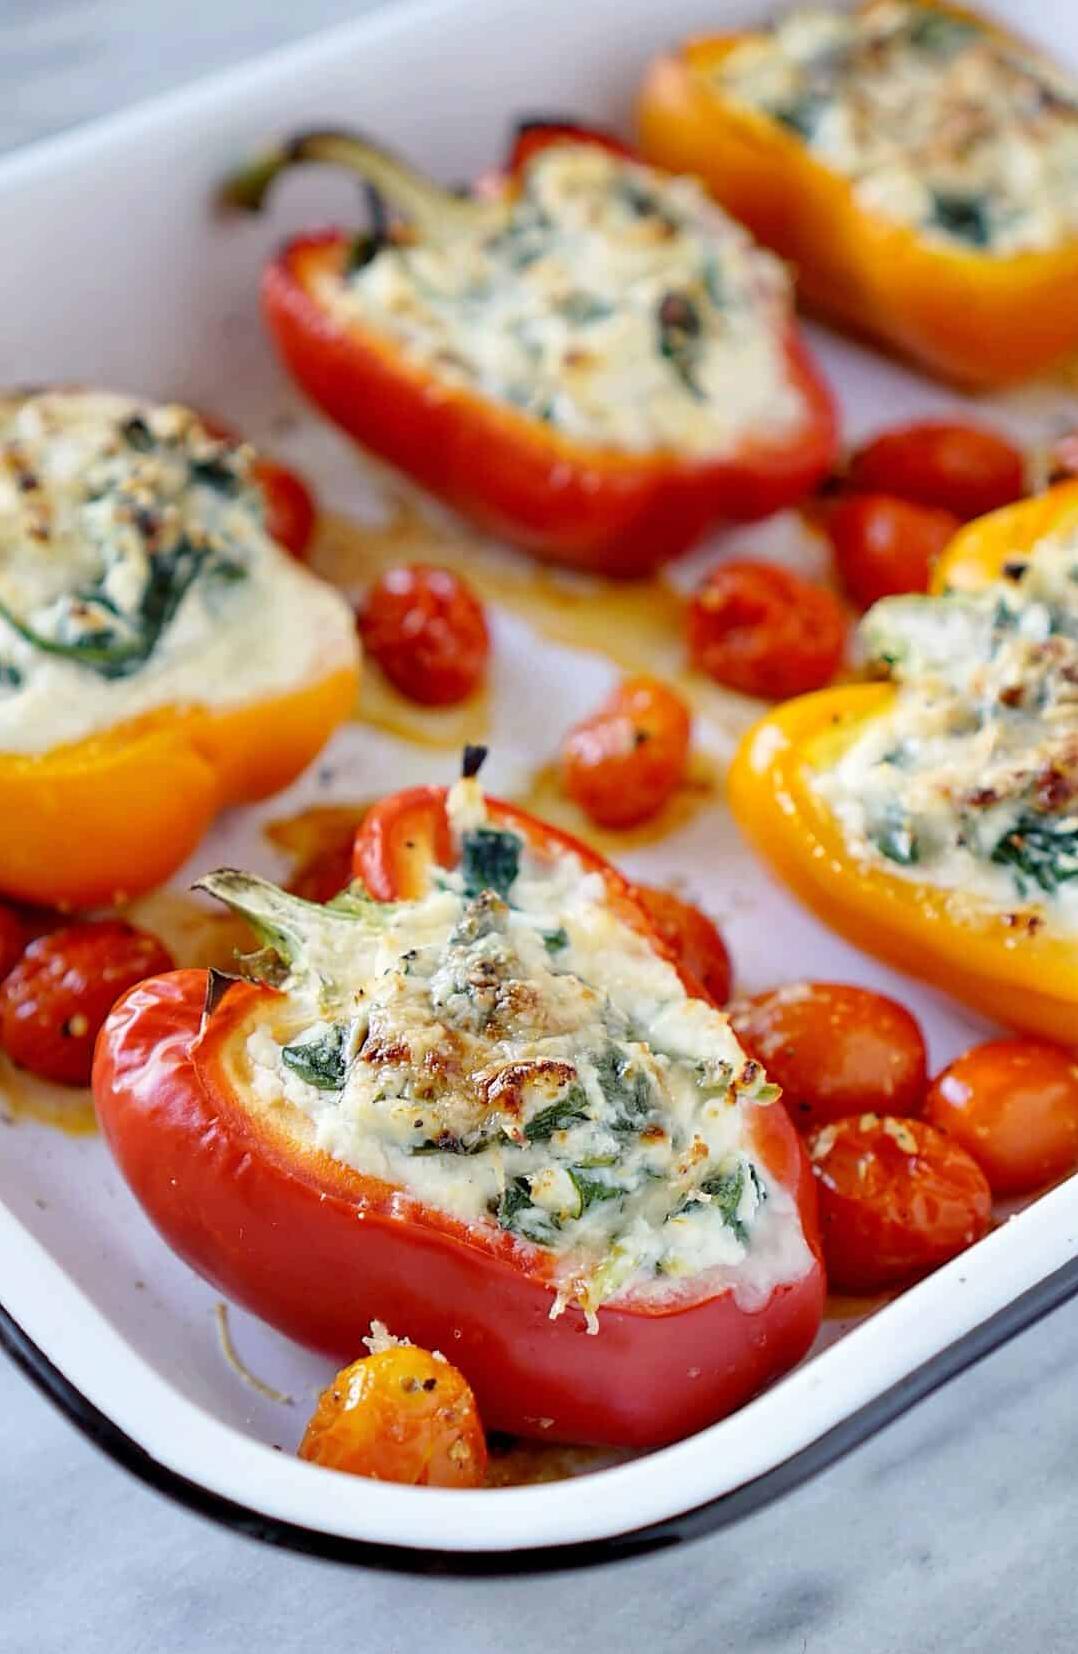  The colors in these stuffed bell peppers are so vibrant, you'll definitely want seconds!